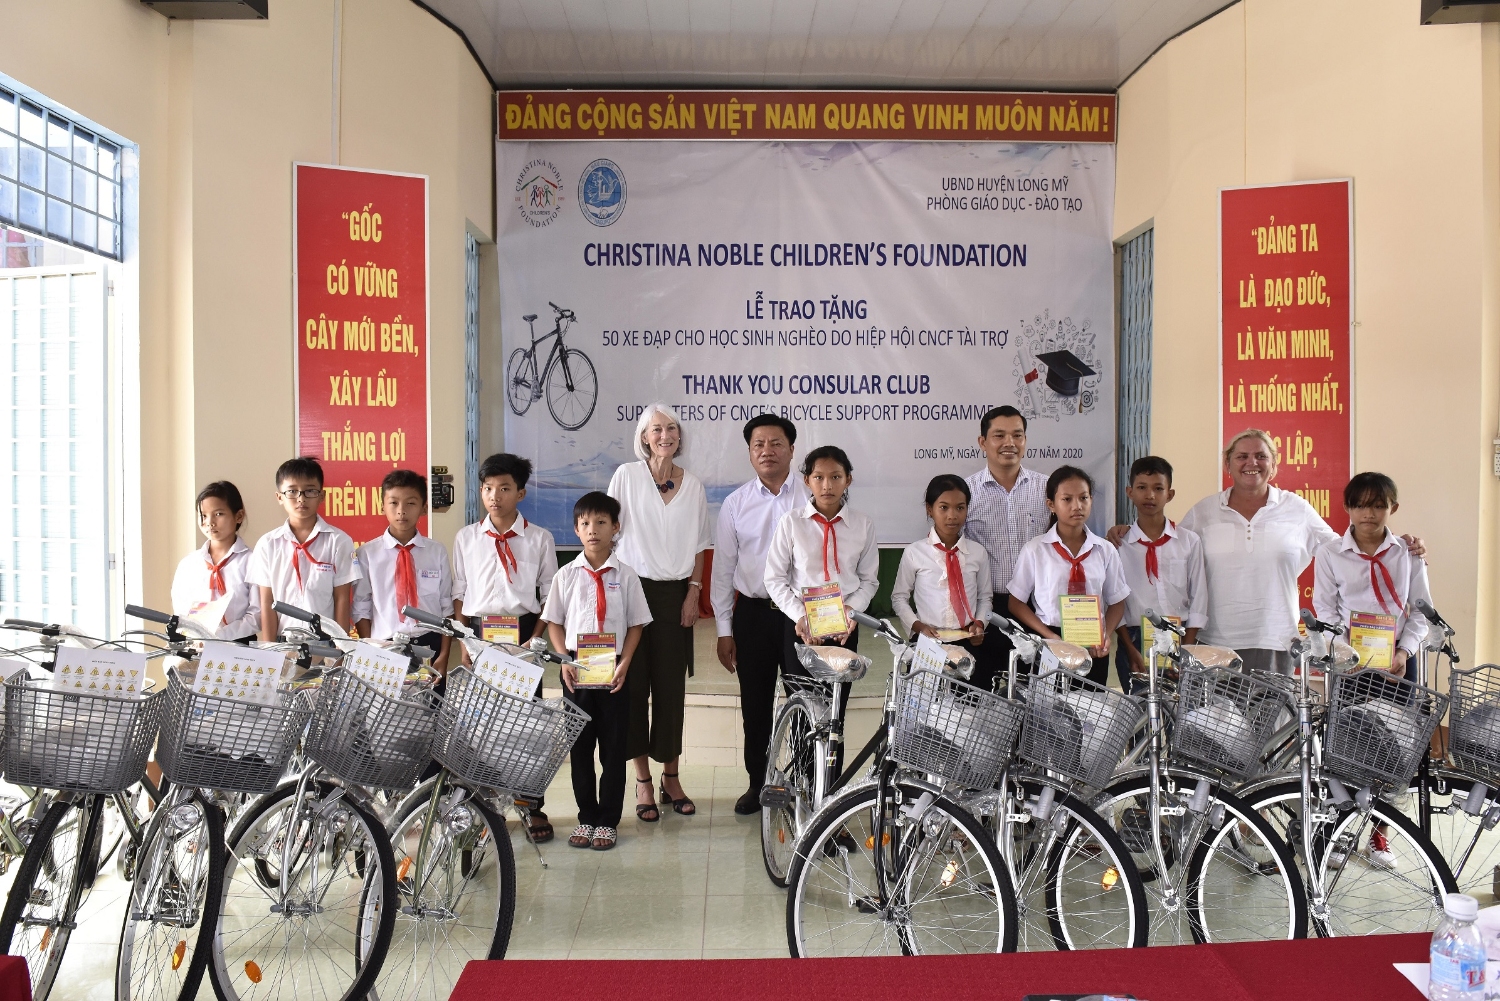 Mr. Le Minh Tuan - Vice Chairman of Hau Giang Union of Friendship Organizations (5th from right) and CNCF grants bicycles to poor students in Long My district.